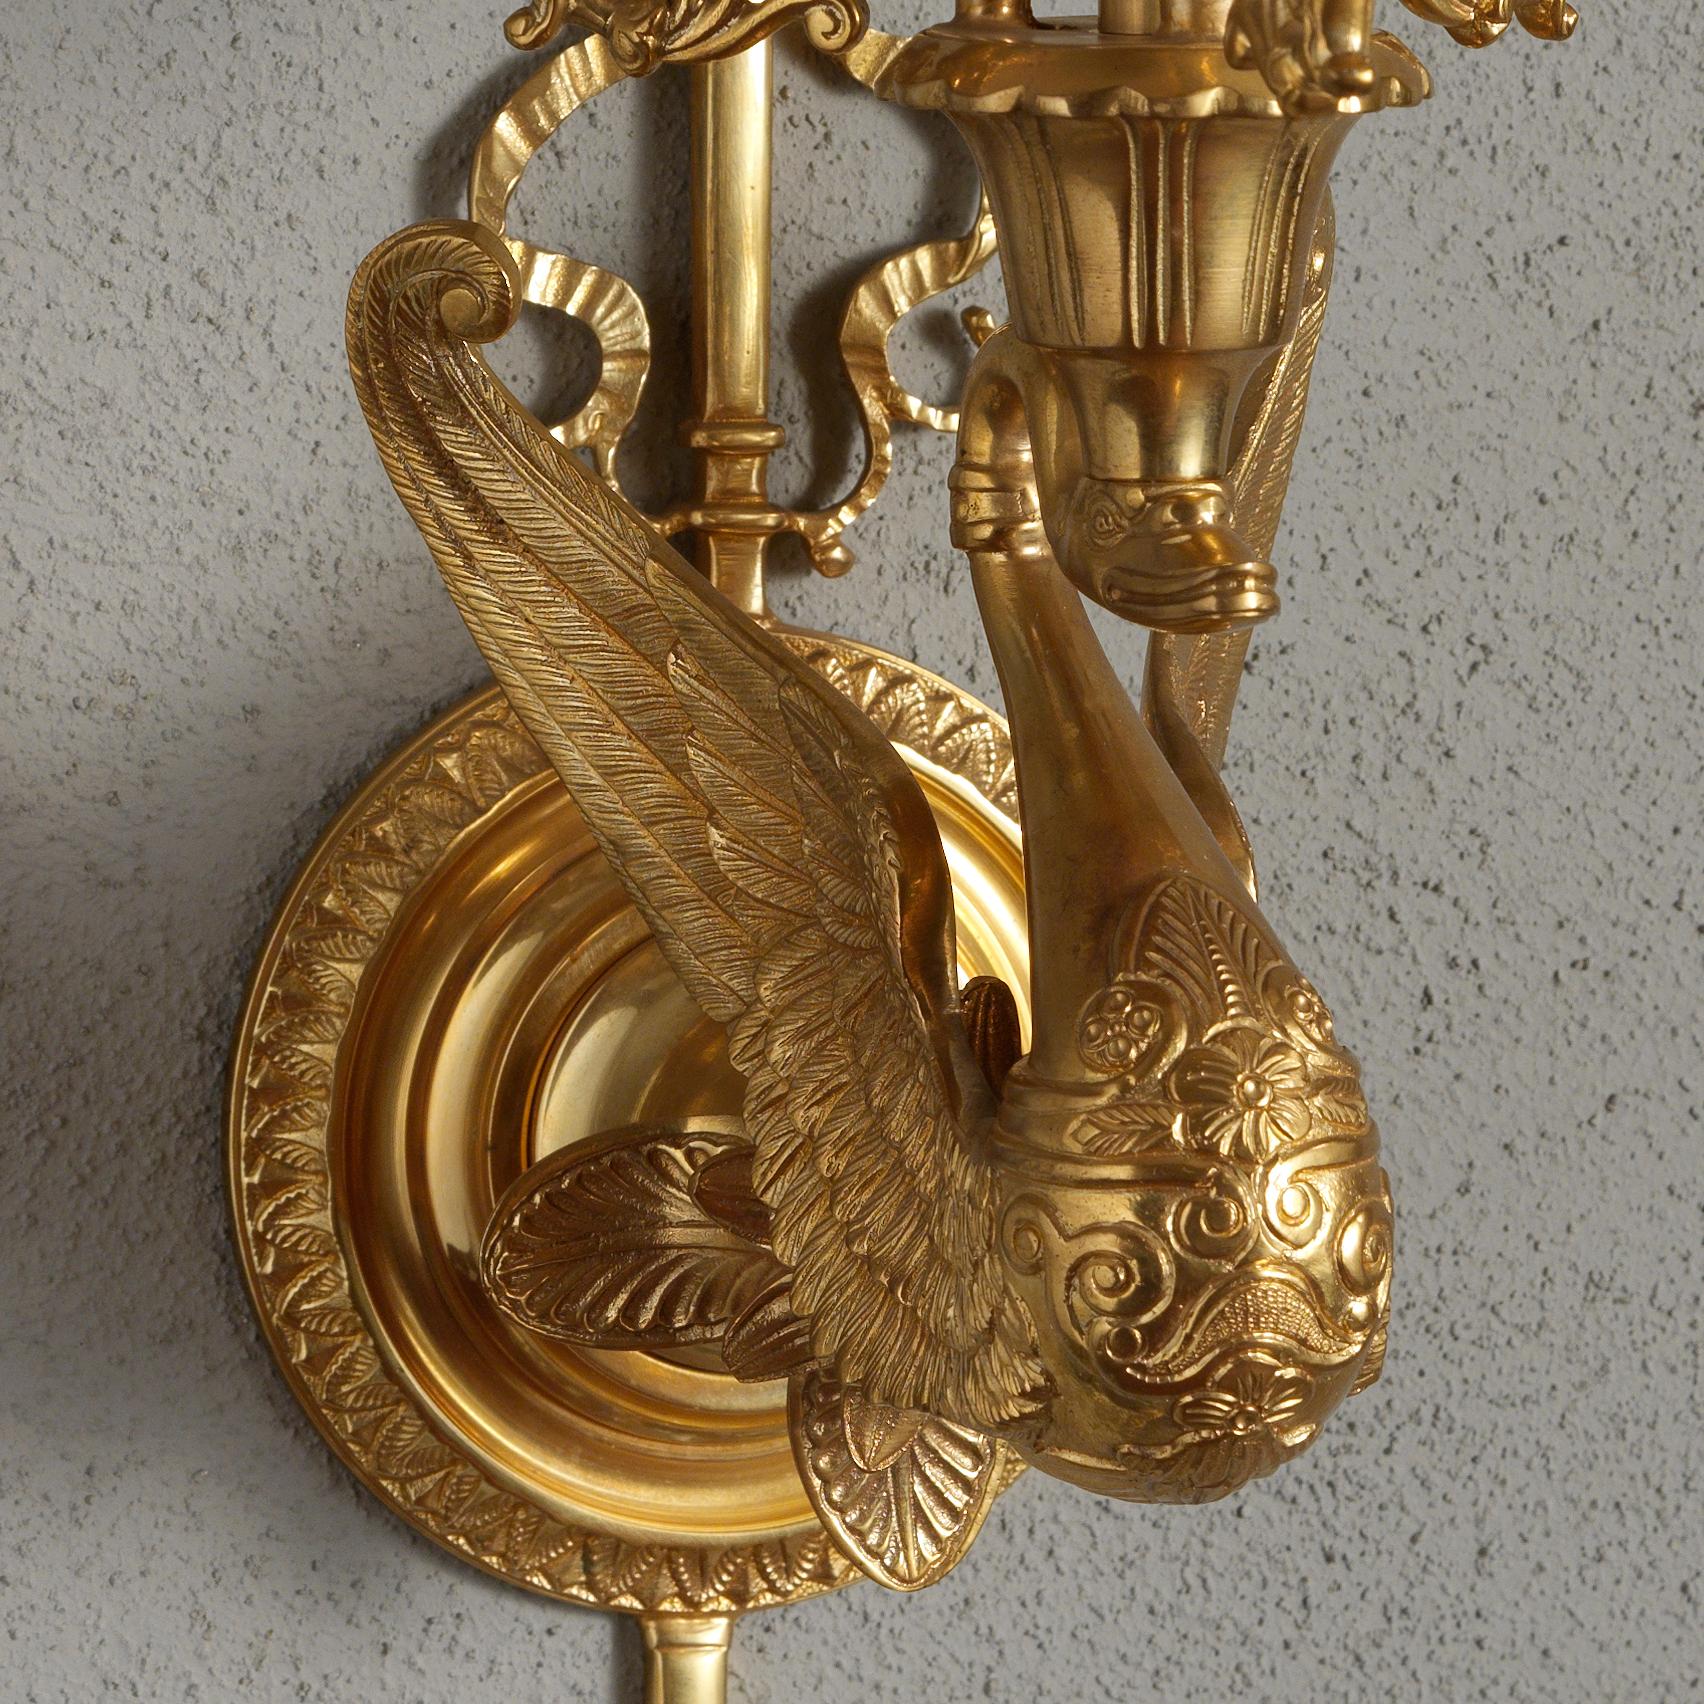 This French Empire style gilt bronze wall sconce by Gherardo Degli Albizzi features the best quality hand-chiselled details.
The backplate of this sconce features a central round plate and an arrow crossing from the top to the bottom. The main piece